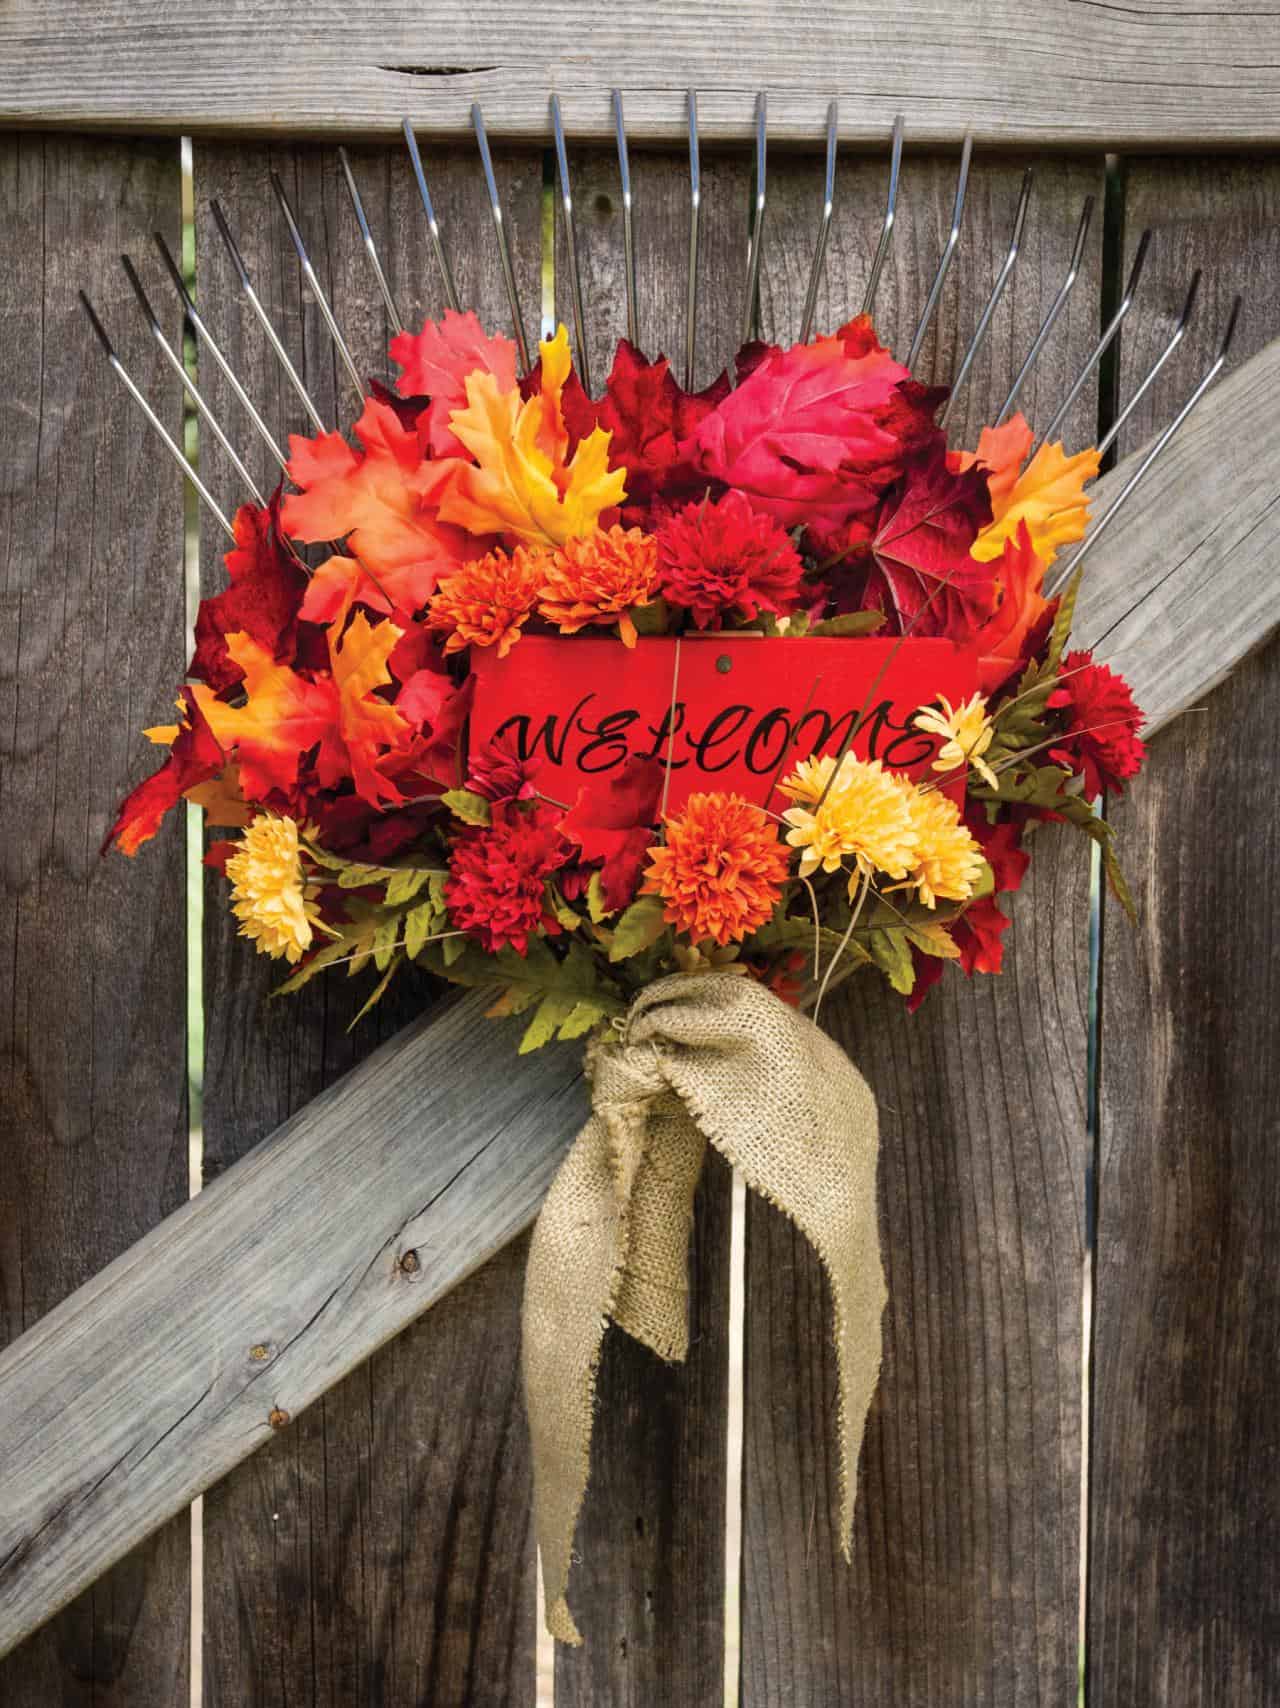 Take last years rack add bold colors and leaves and you have the ultimate fall decor.